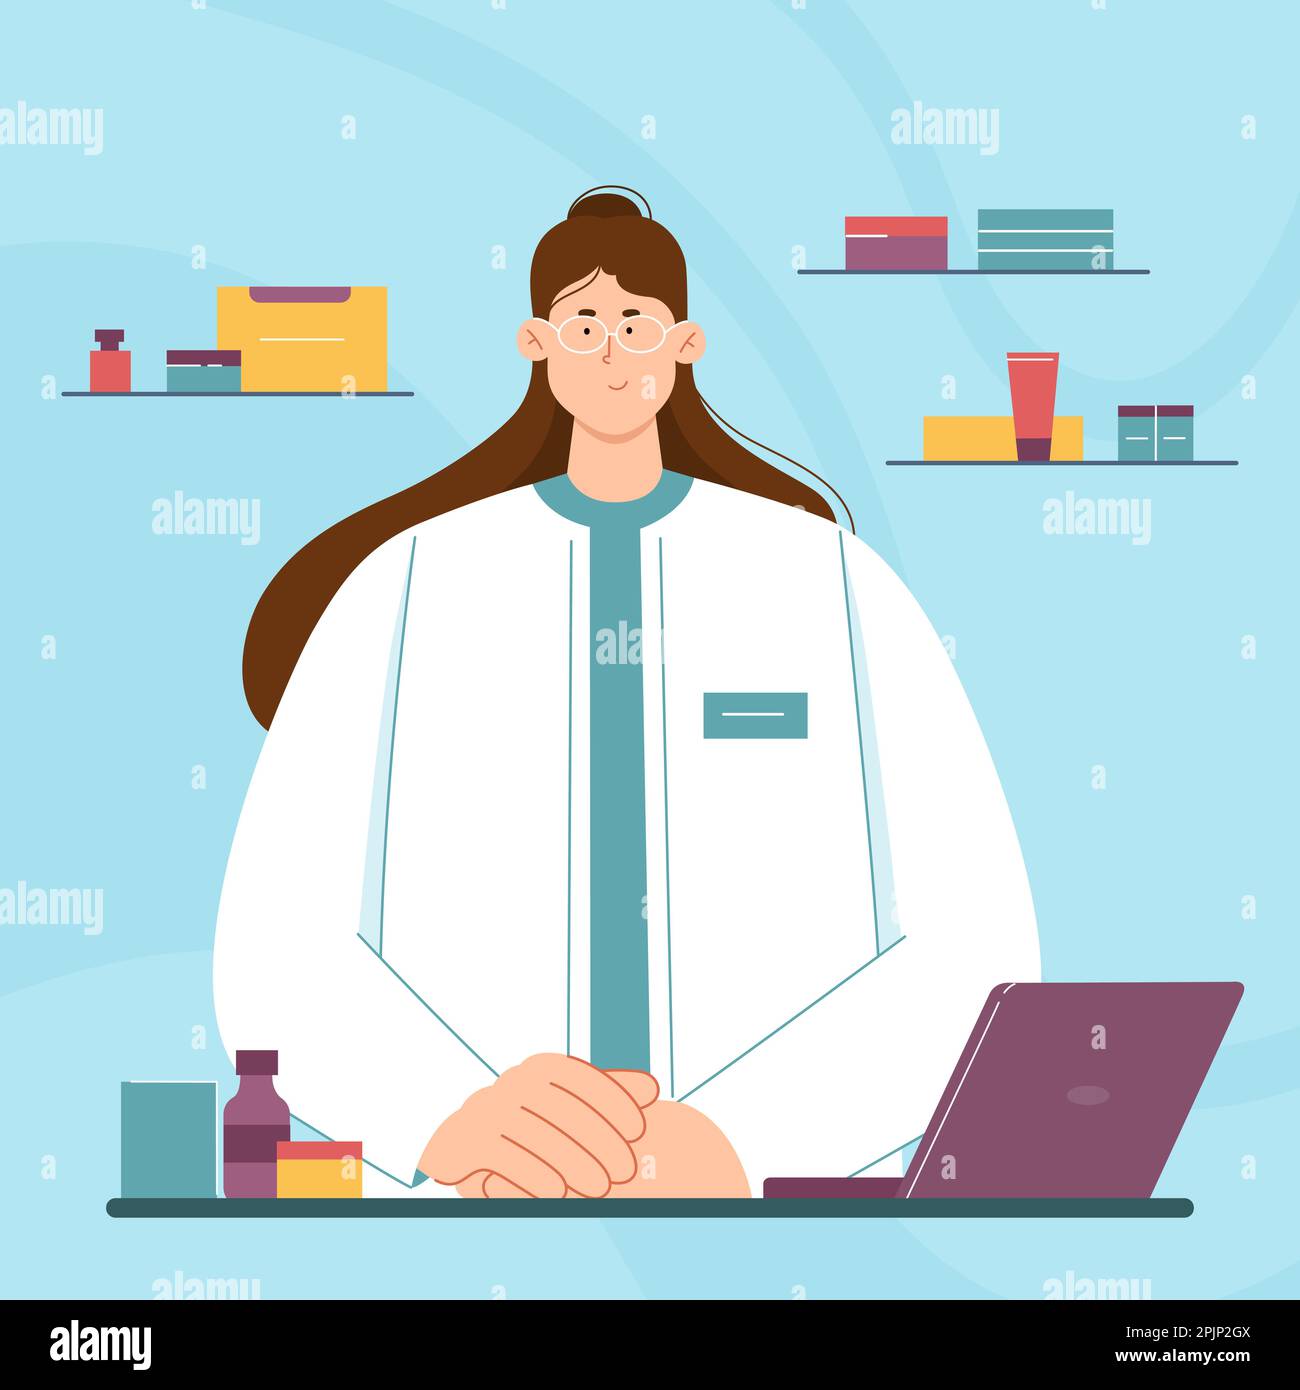 Cartoon woman selling pills in modern medical shop interior with medications, vitamins, drugs on shelves and computer. Pharmacy store with pharmacist standing at drugstore counter vector illustration. Stock Vector